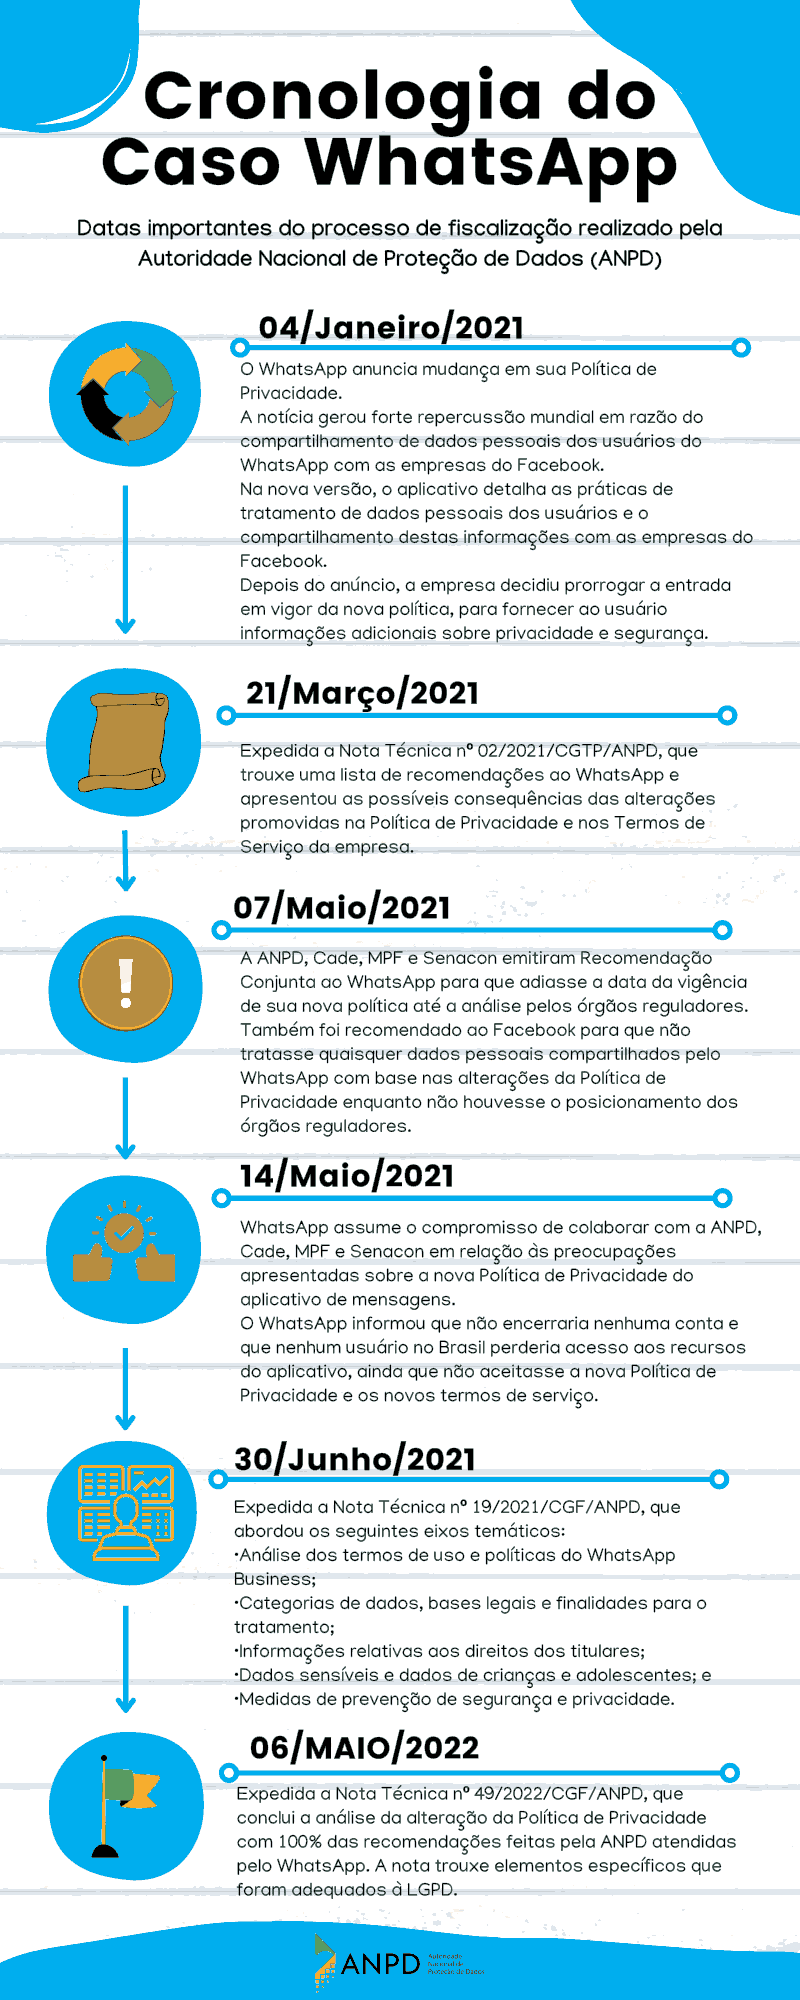 ANPD's infographic timeline of events in the WhatsApp data sharing case.